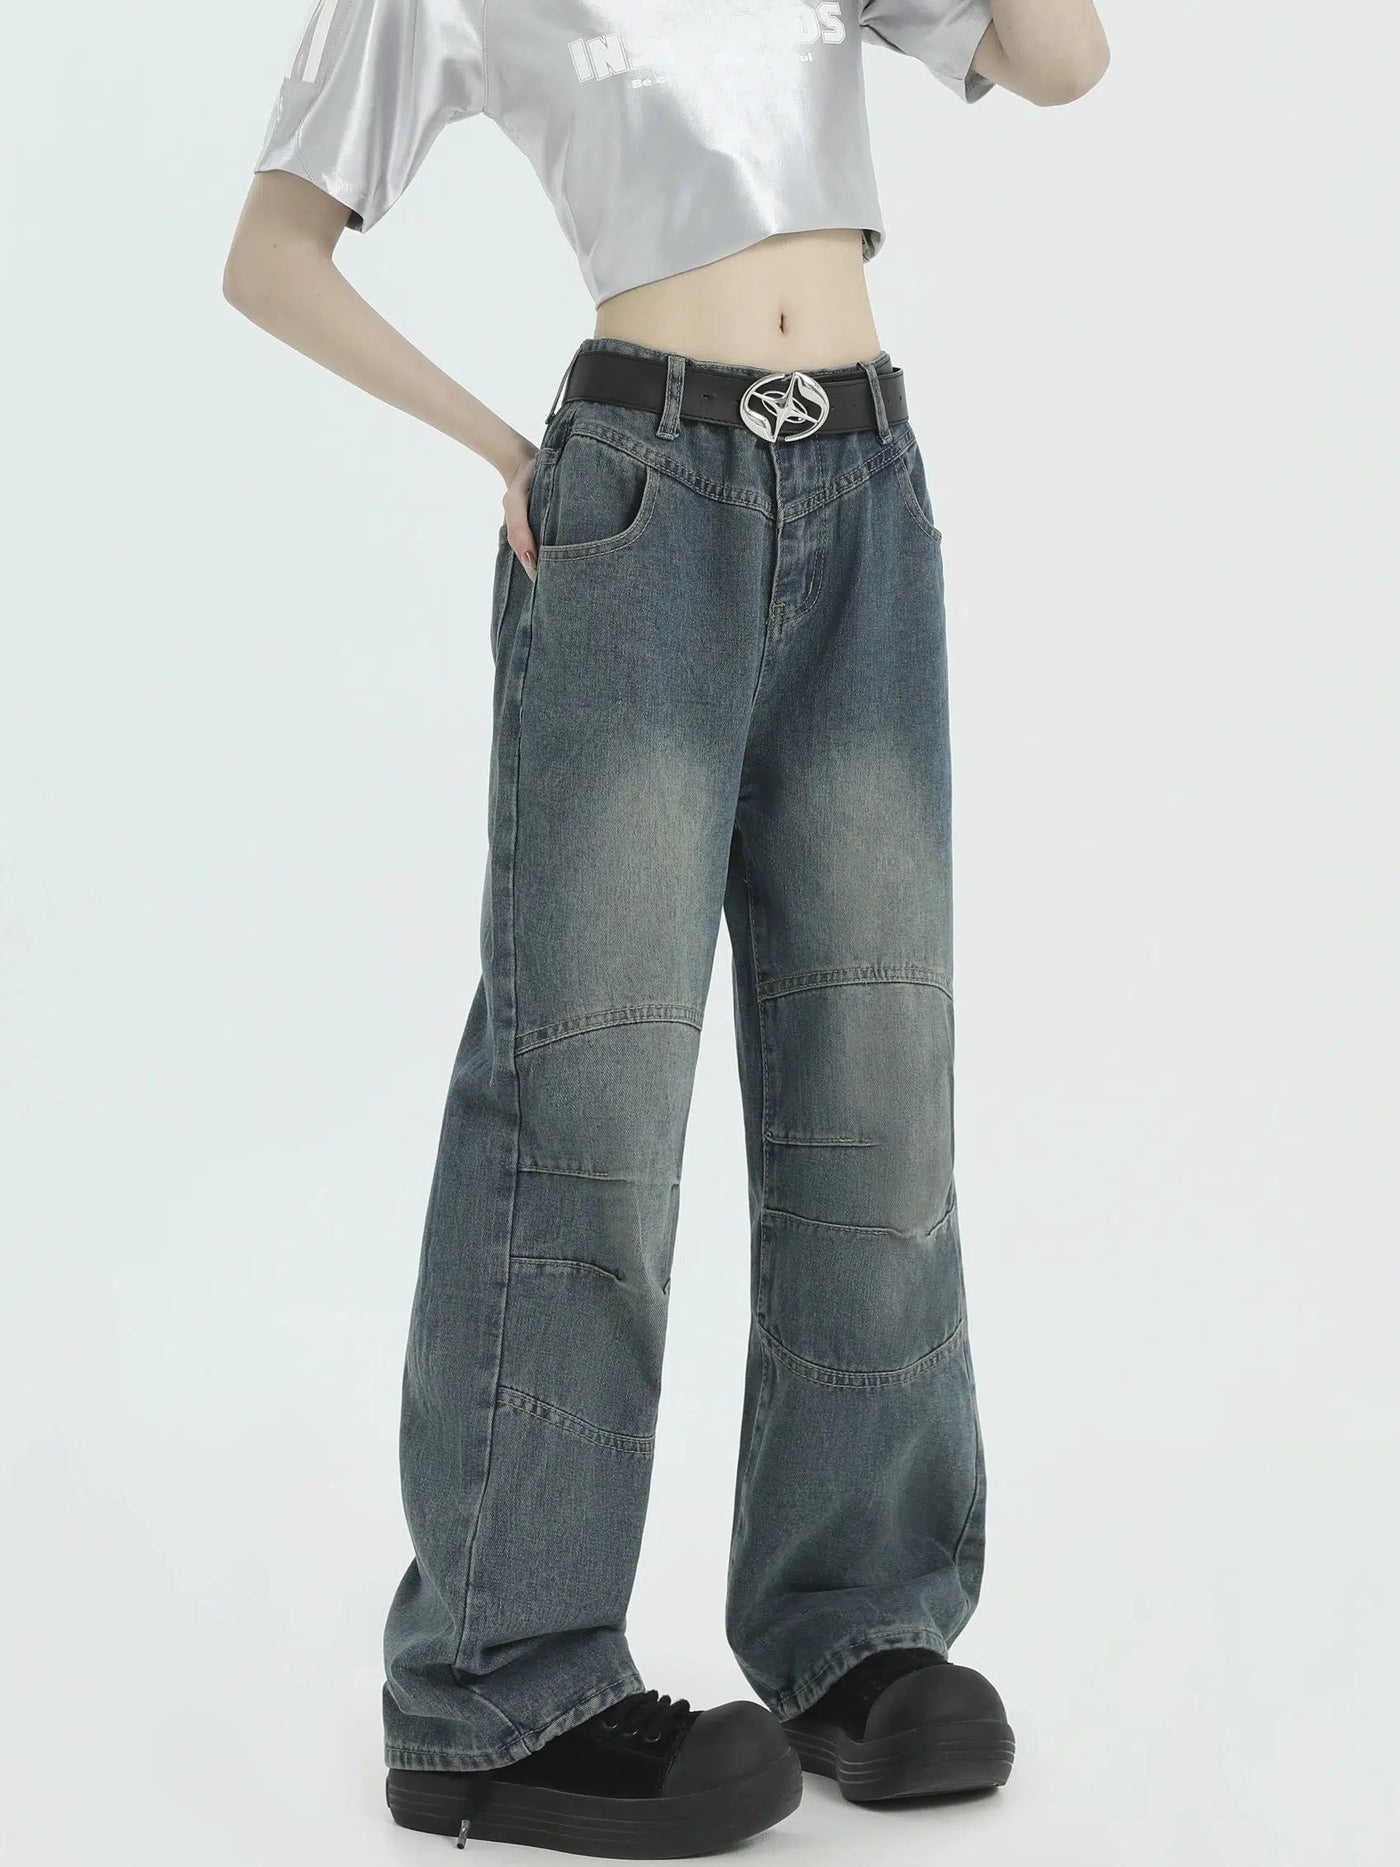 Seam Lines Comfty Jeans Korean Street Fashion Jeans By INS Korea Shop Online at OH Vault